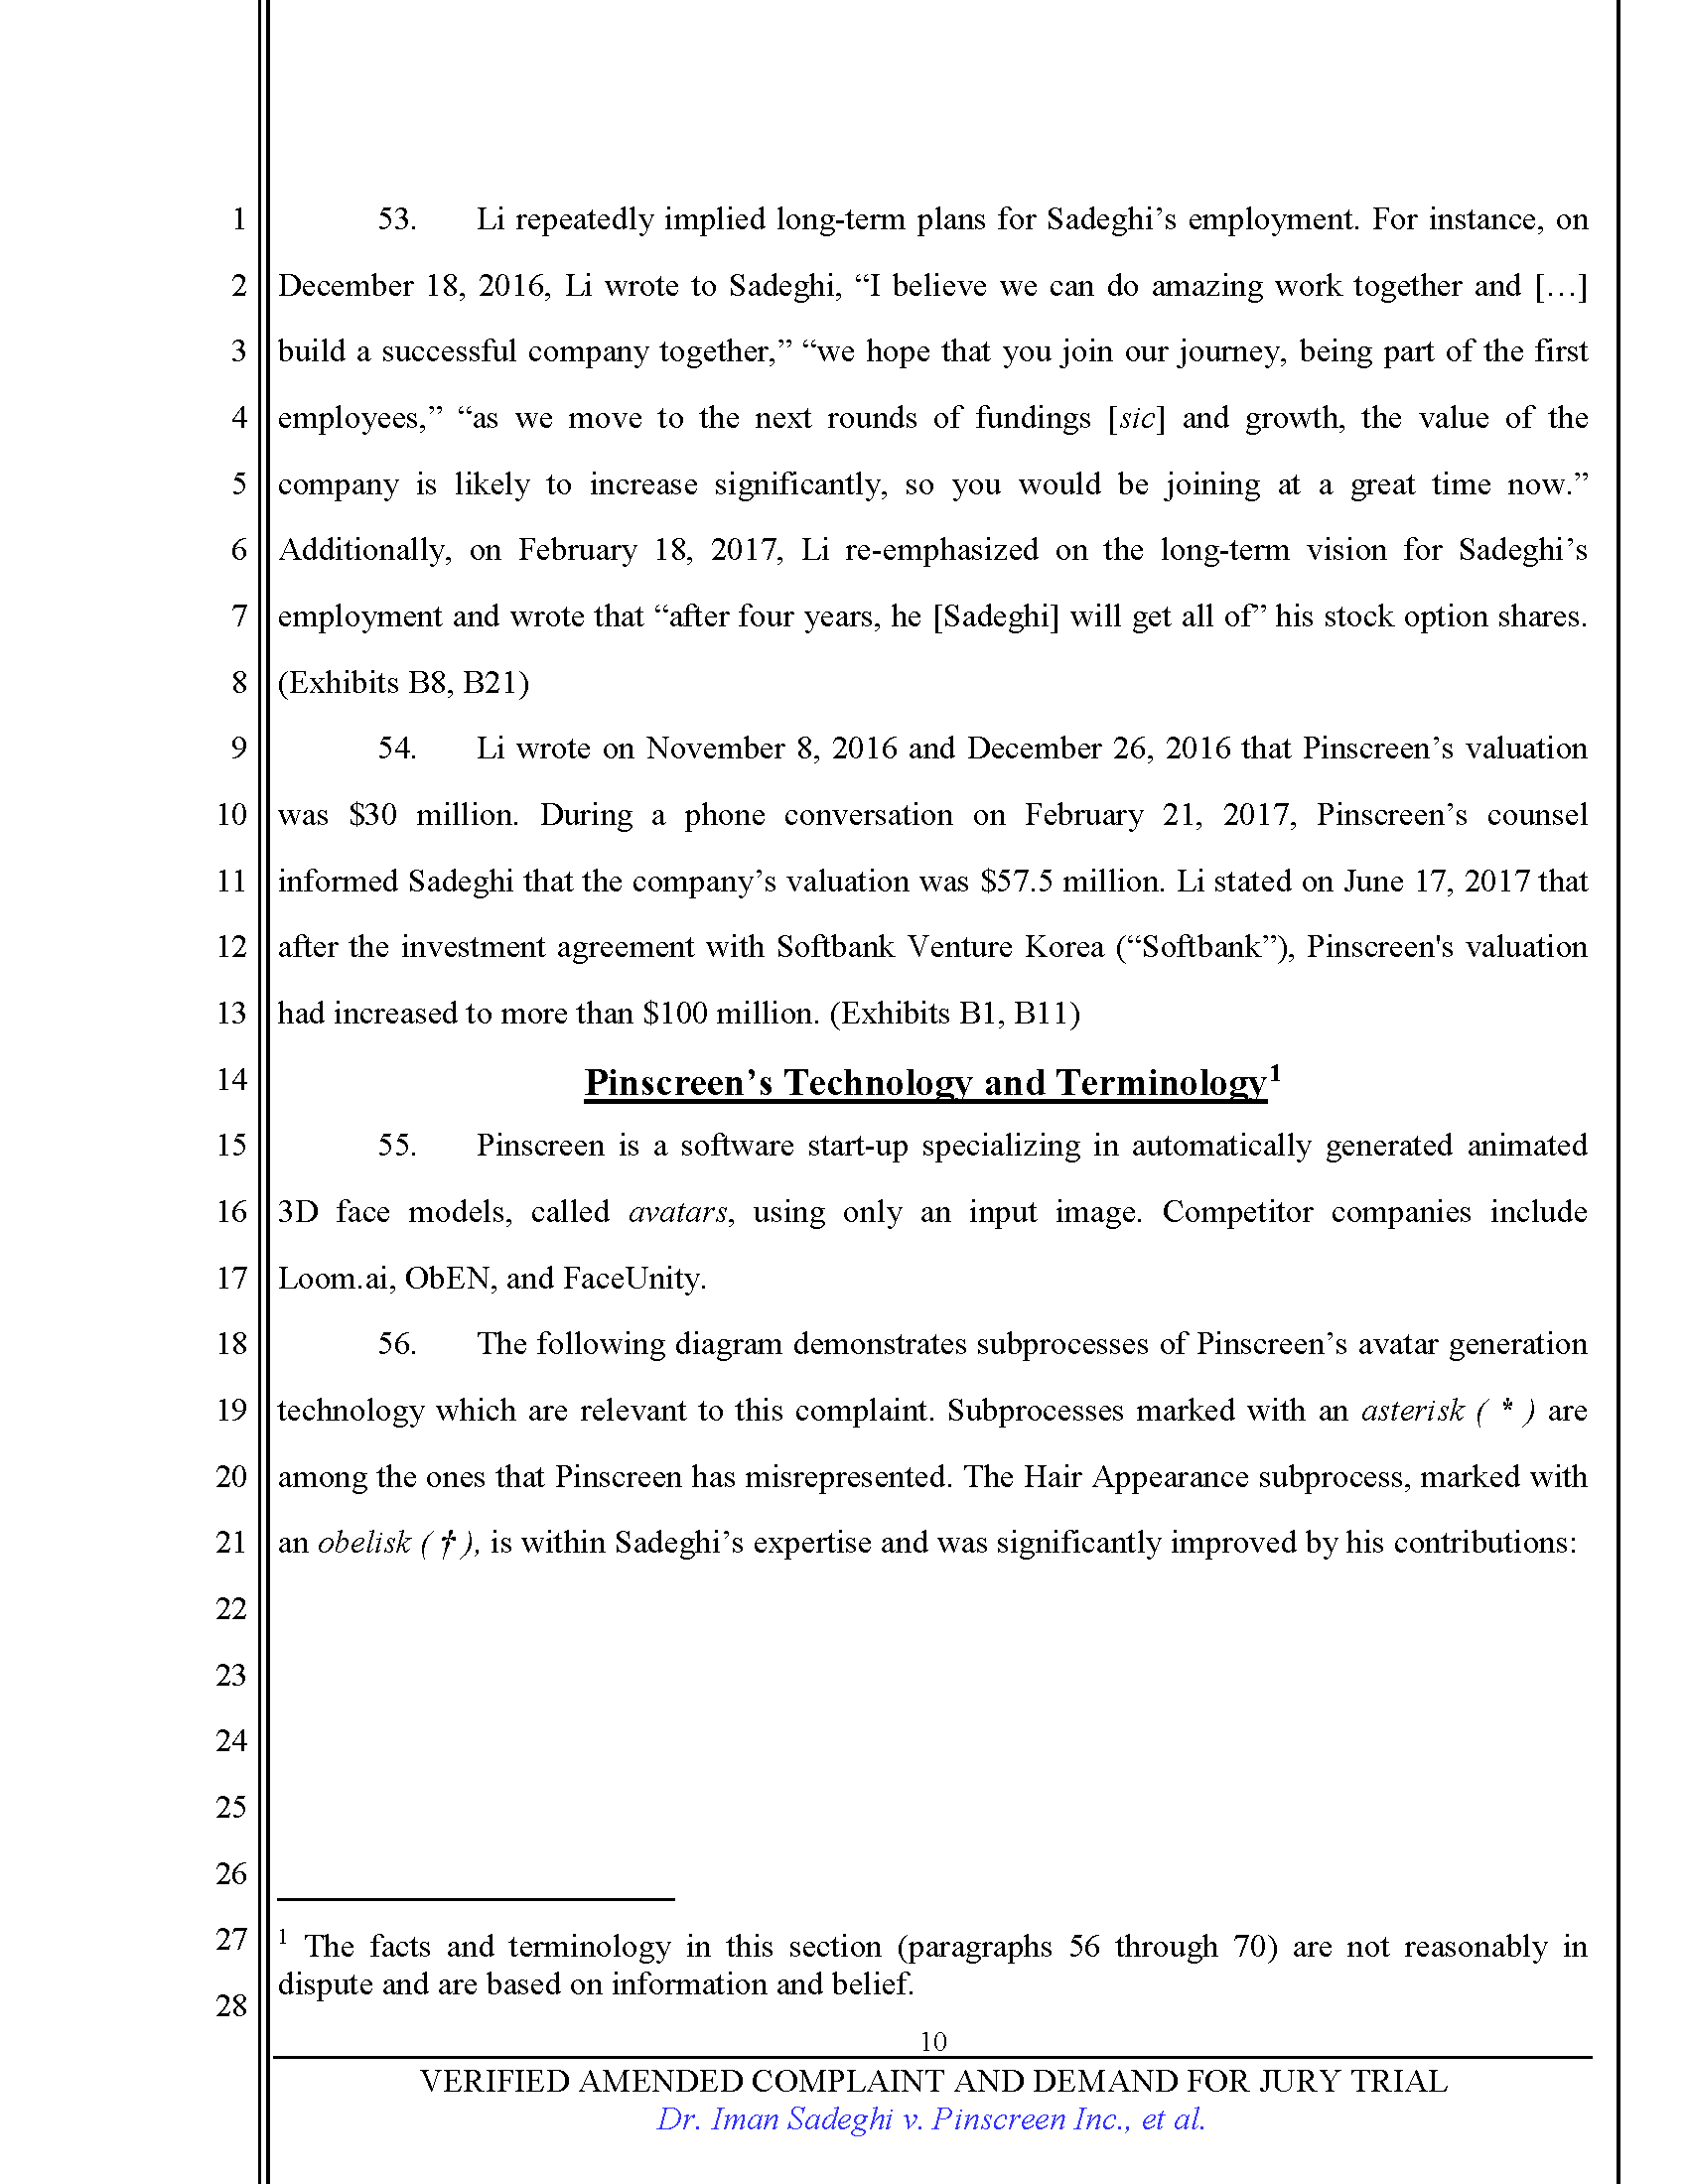 First Amended Complaint (FAC) Page 10